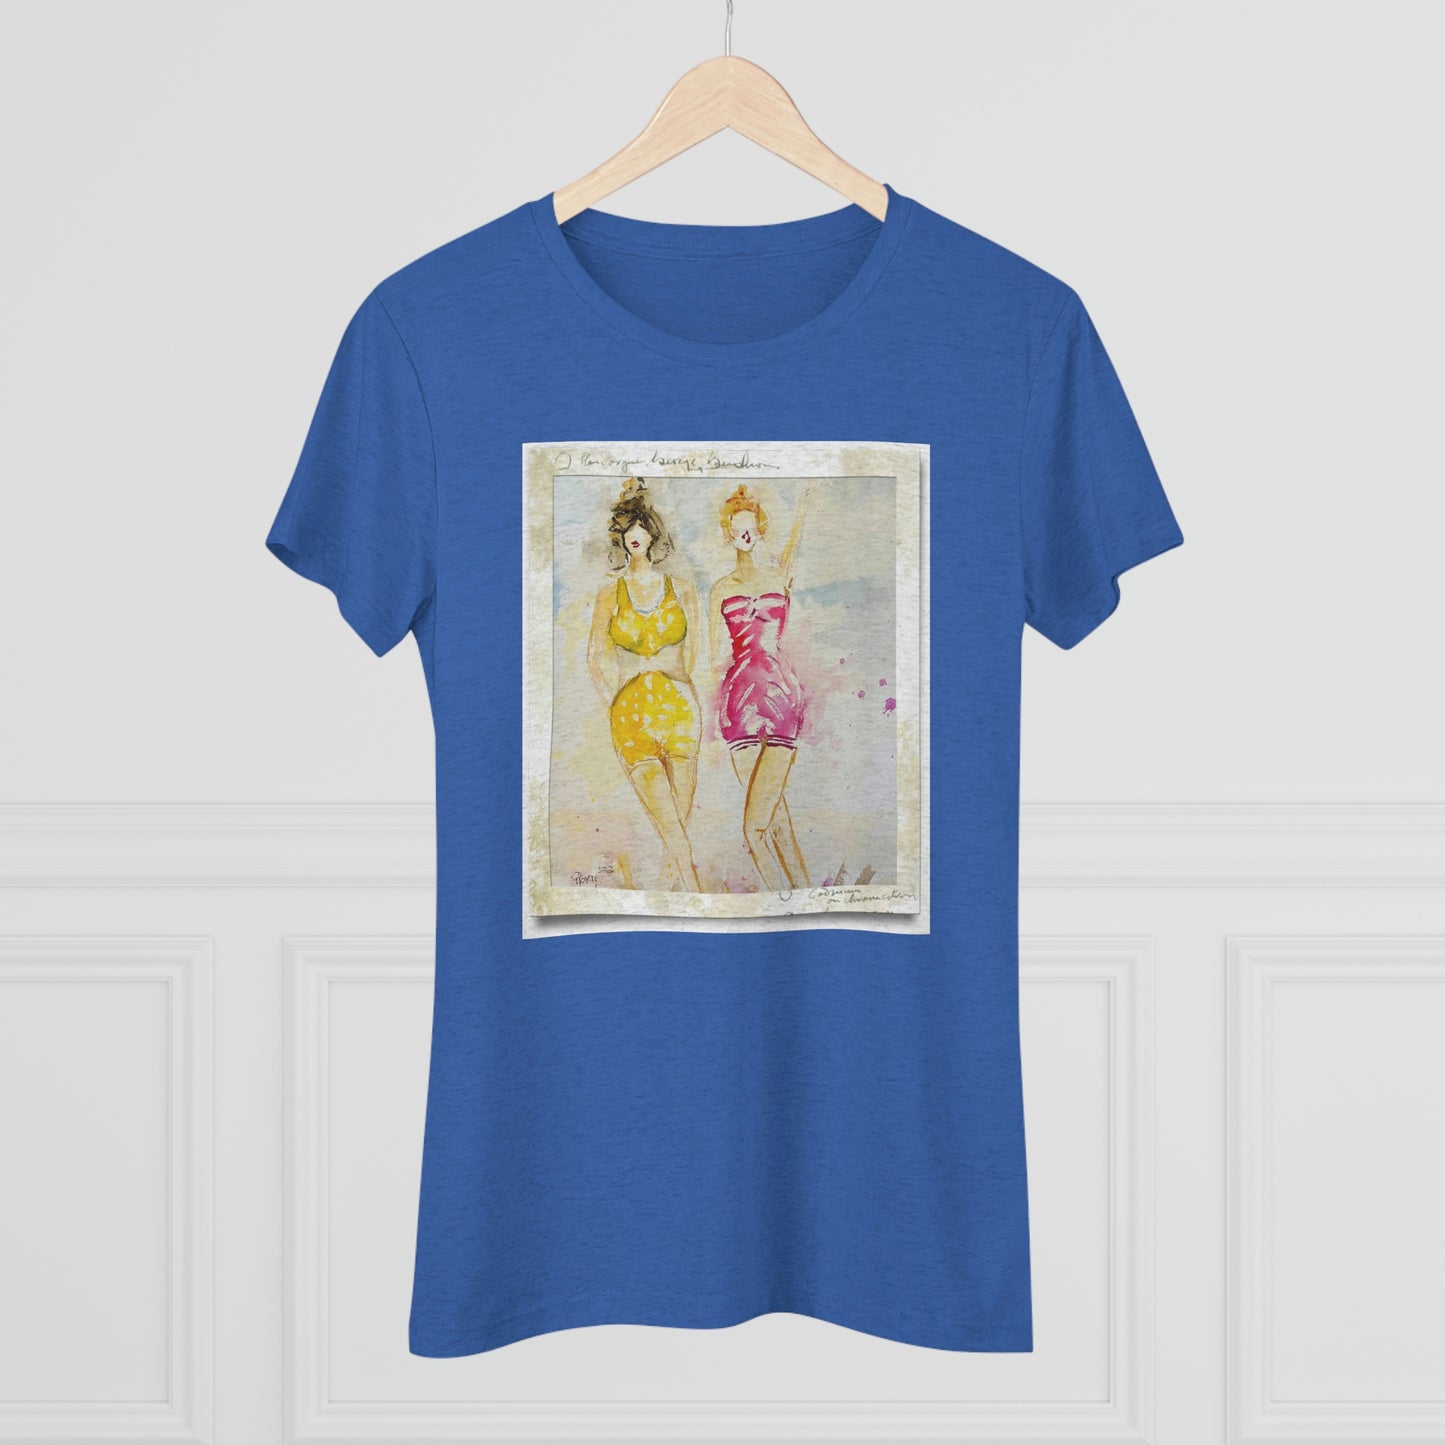 Back in the Day Beach Babes (image on front) Women's fitted Triblend Tee  tee shirt